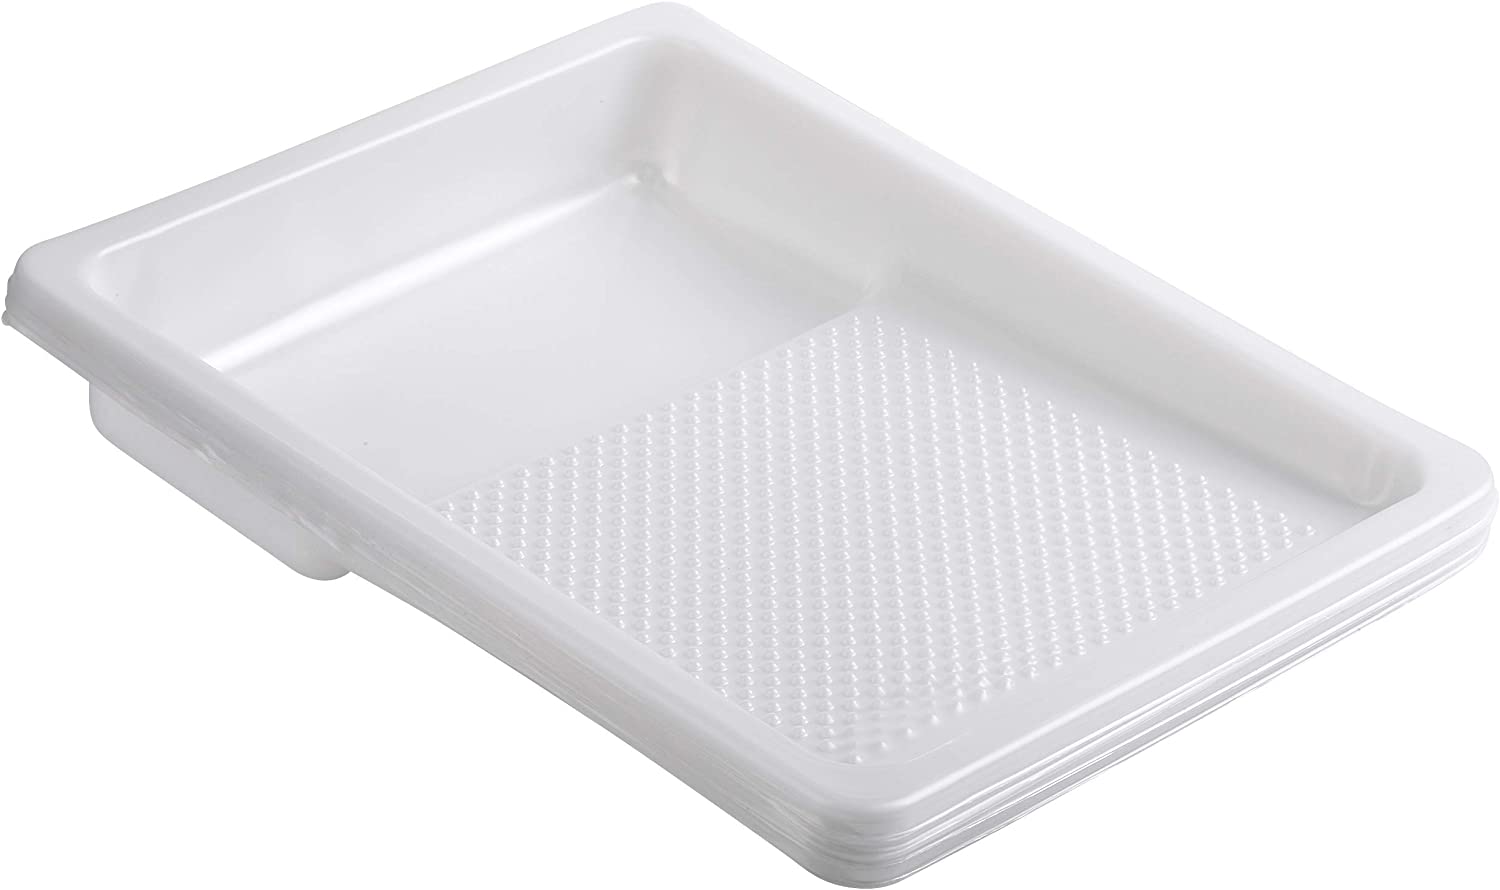 Bates- Paint Tray Liner, 9 Inch, 20 Pack, Paint Pans Trays, Plastic Paint  Tray, Disposable Paint Tray, Paint Roller Tray - Bates Choice